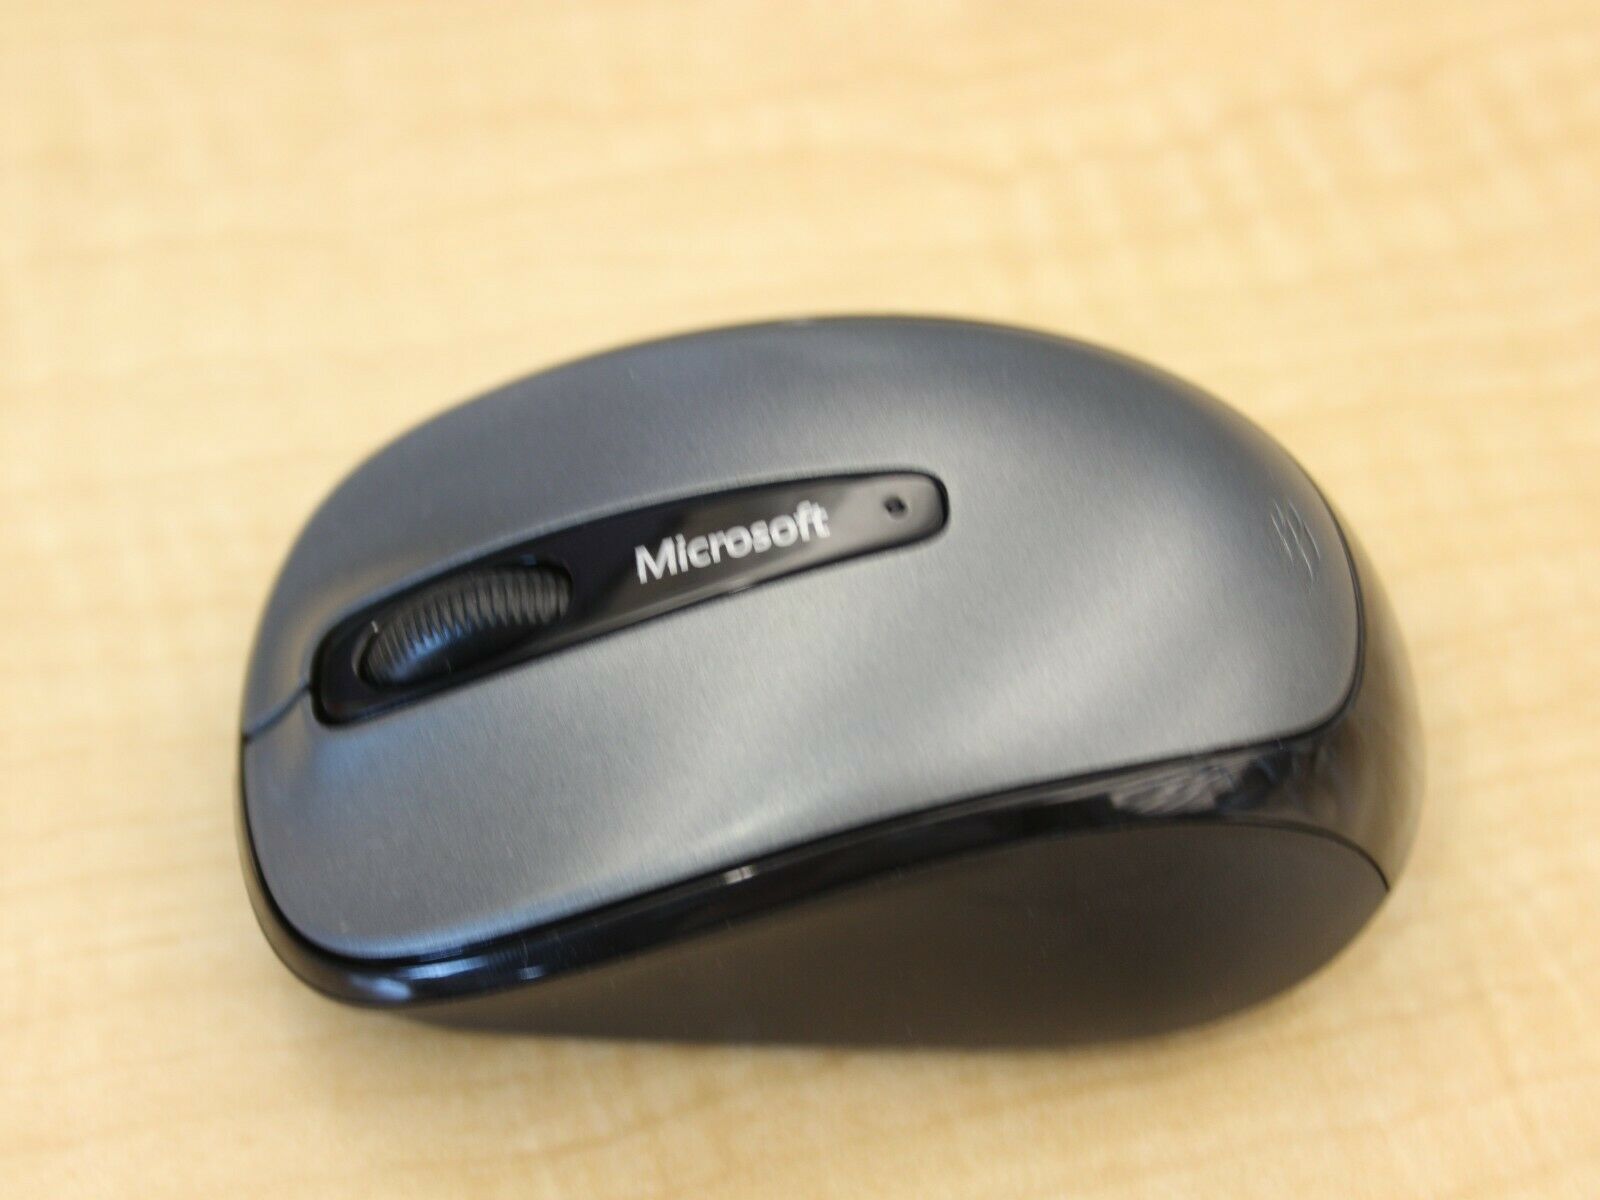 Microsoft Wireless mouse Model 3500 Silver and Black - $11.99